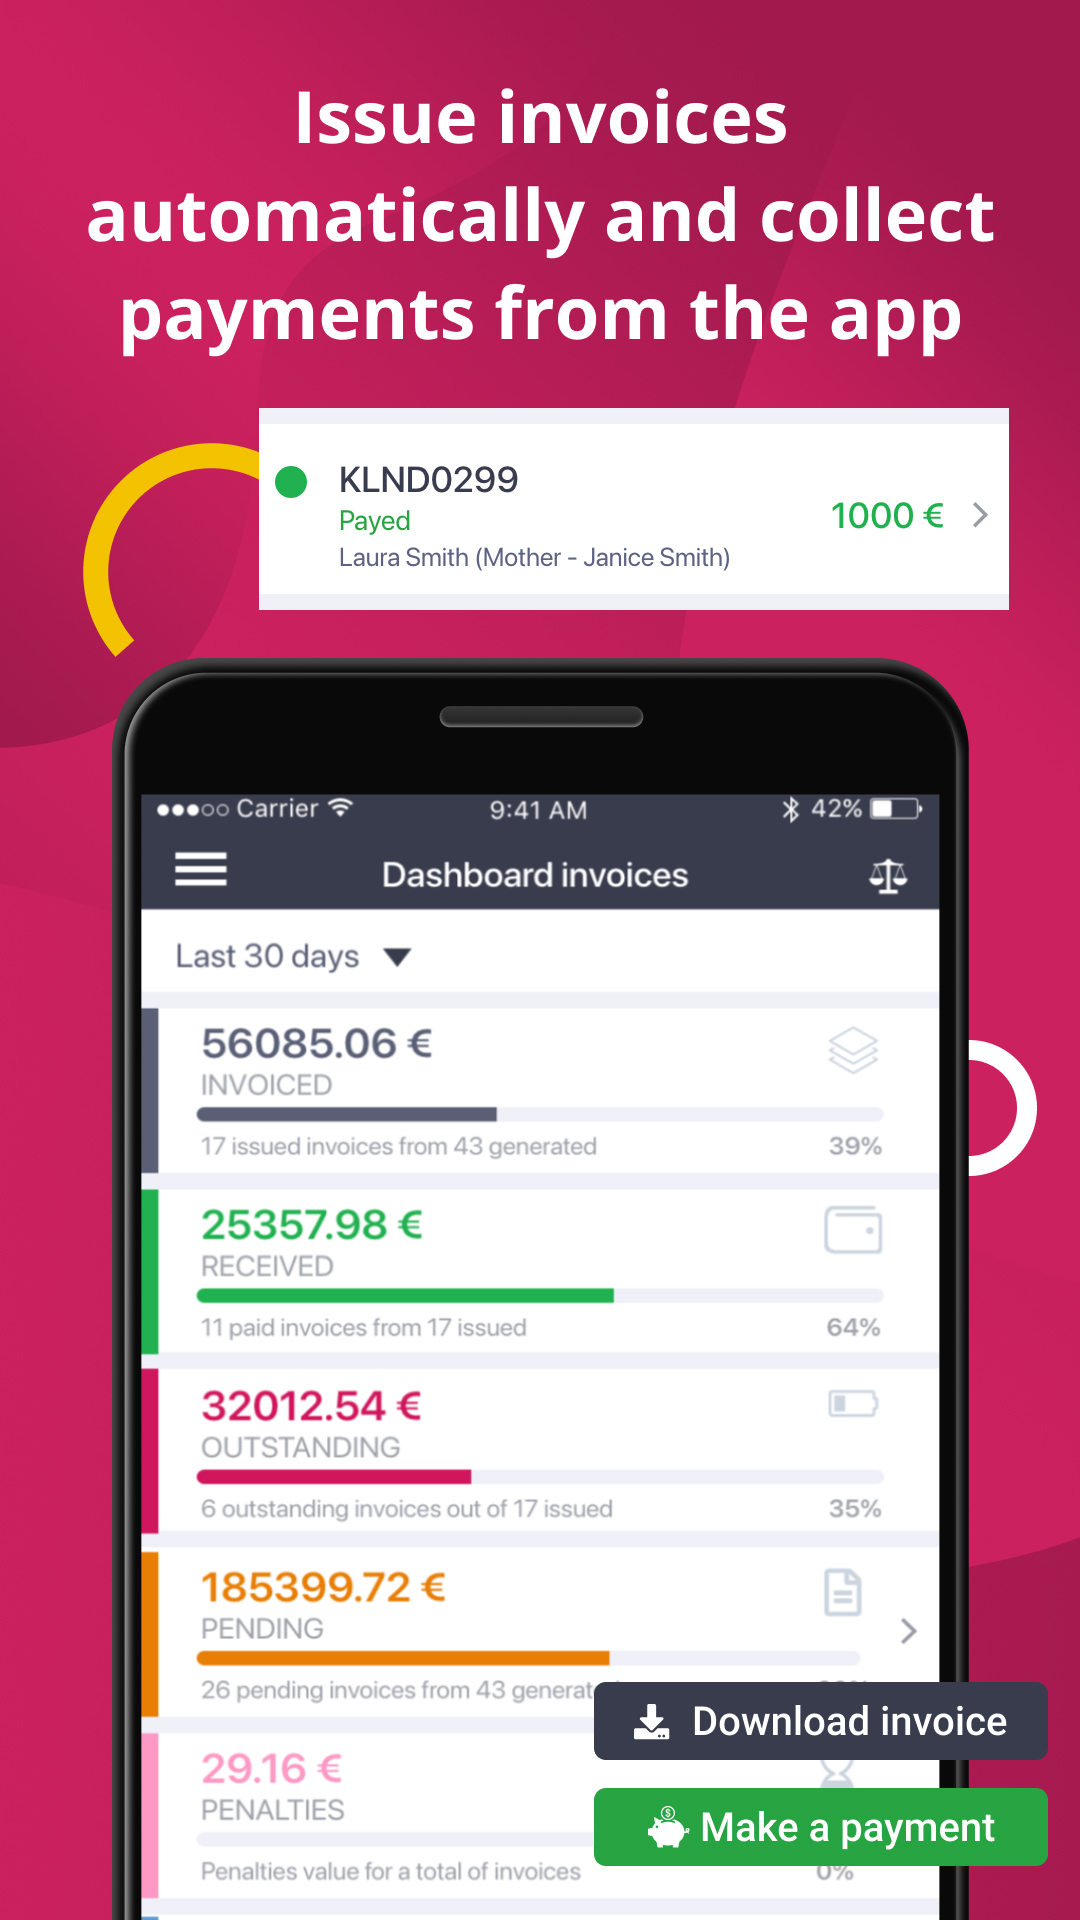 Optimise your school’s  financial management: Create billing plans for tuition fees, send invoices automatically, track payments and deposits with just a few clicks. Analyse family balance, collect penalties and easily generate custom reports.